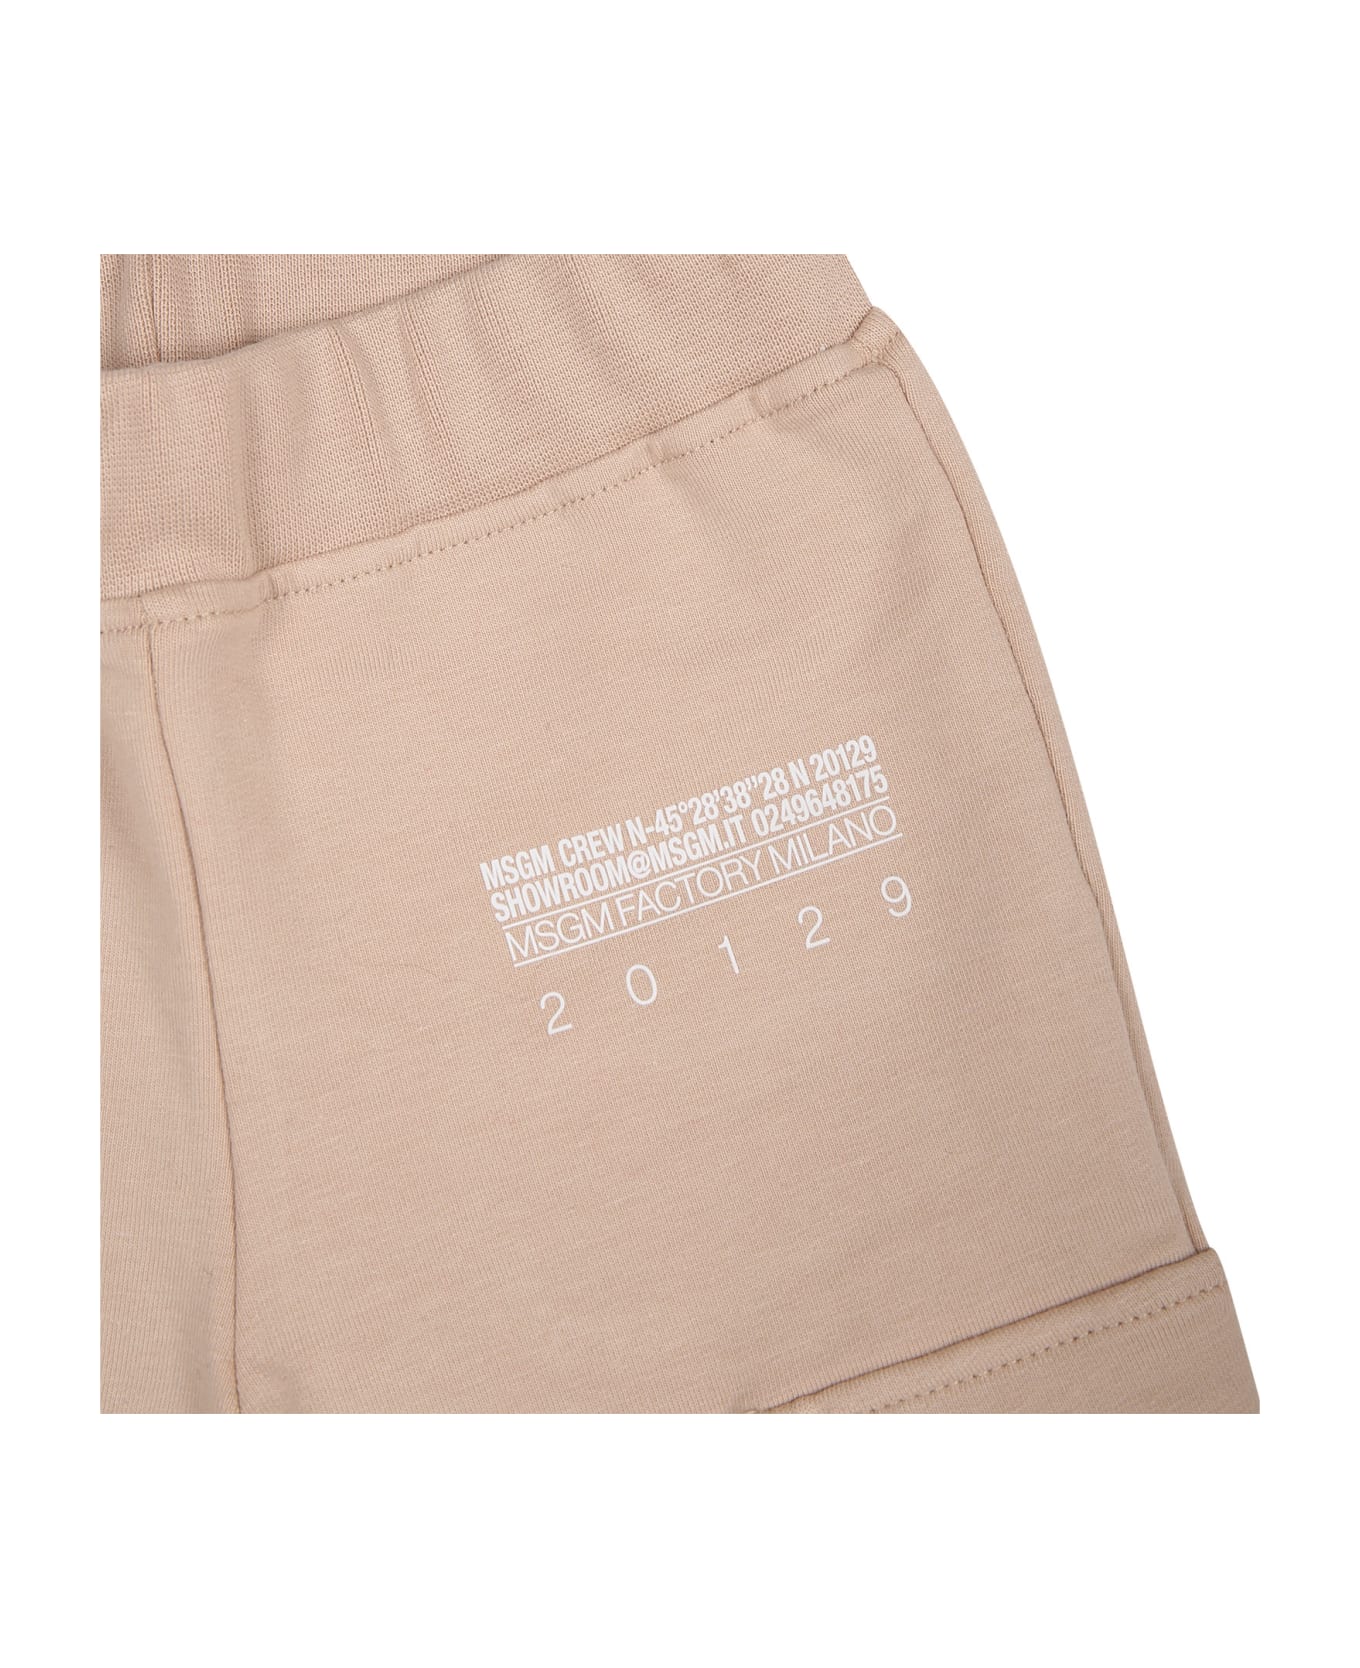 MSGM Beige Trousers For Baby Boy With Logo - Beige ボトムス